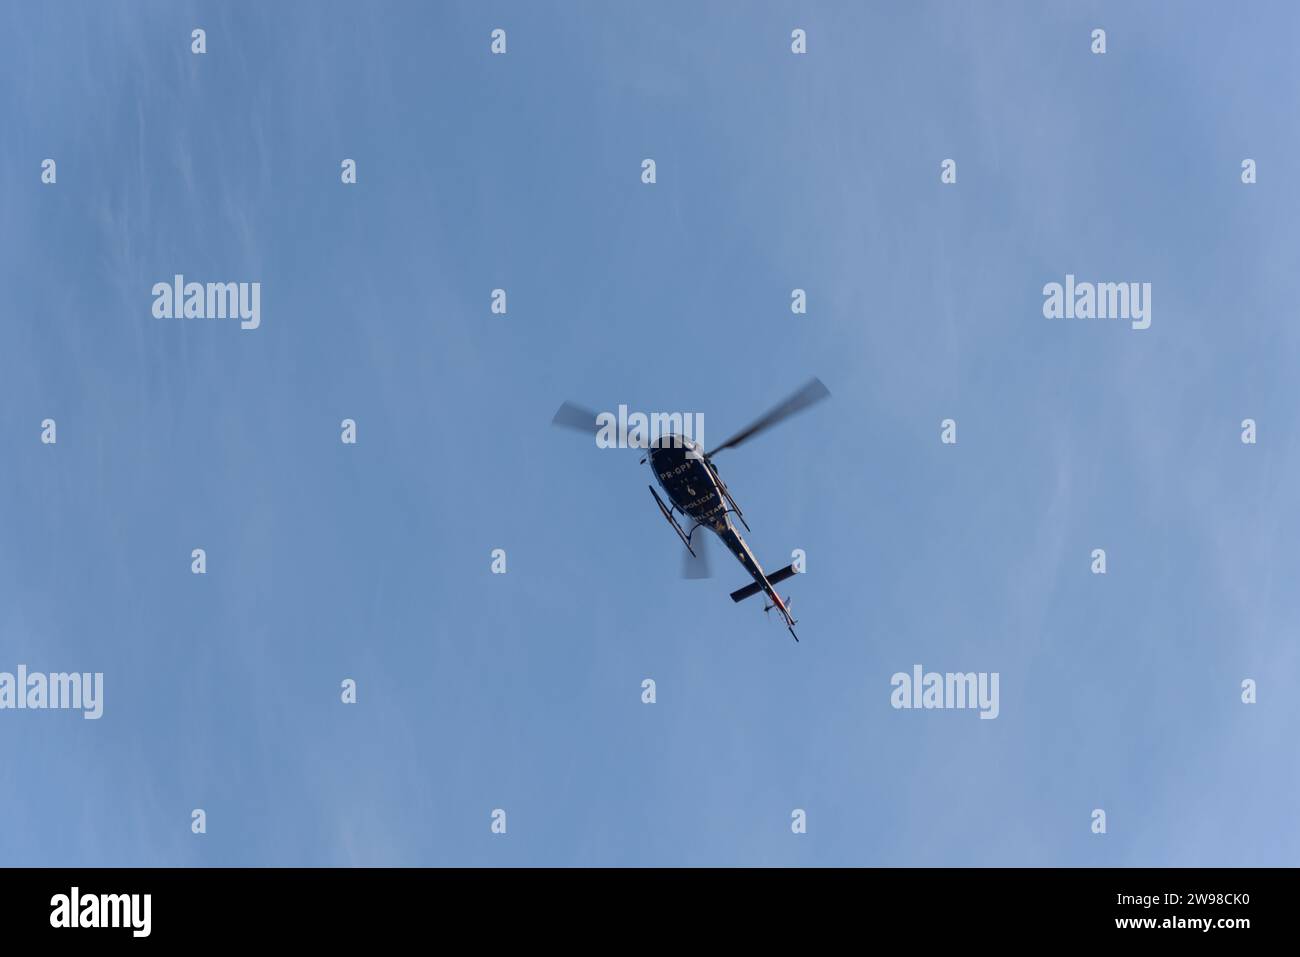 Salvador, Bahia, Brazil - April 26, 2019: Military police helicopter is seen flying over Jaguaribe beach in the city of Salvador, Bahia. Stock Photo